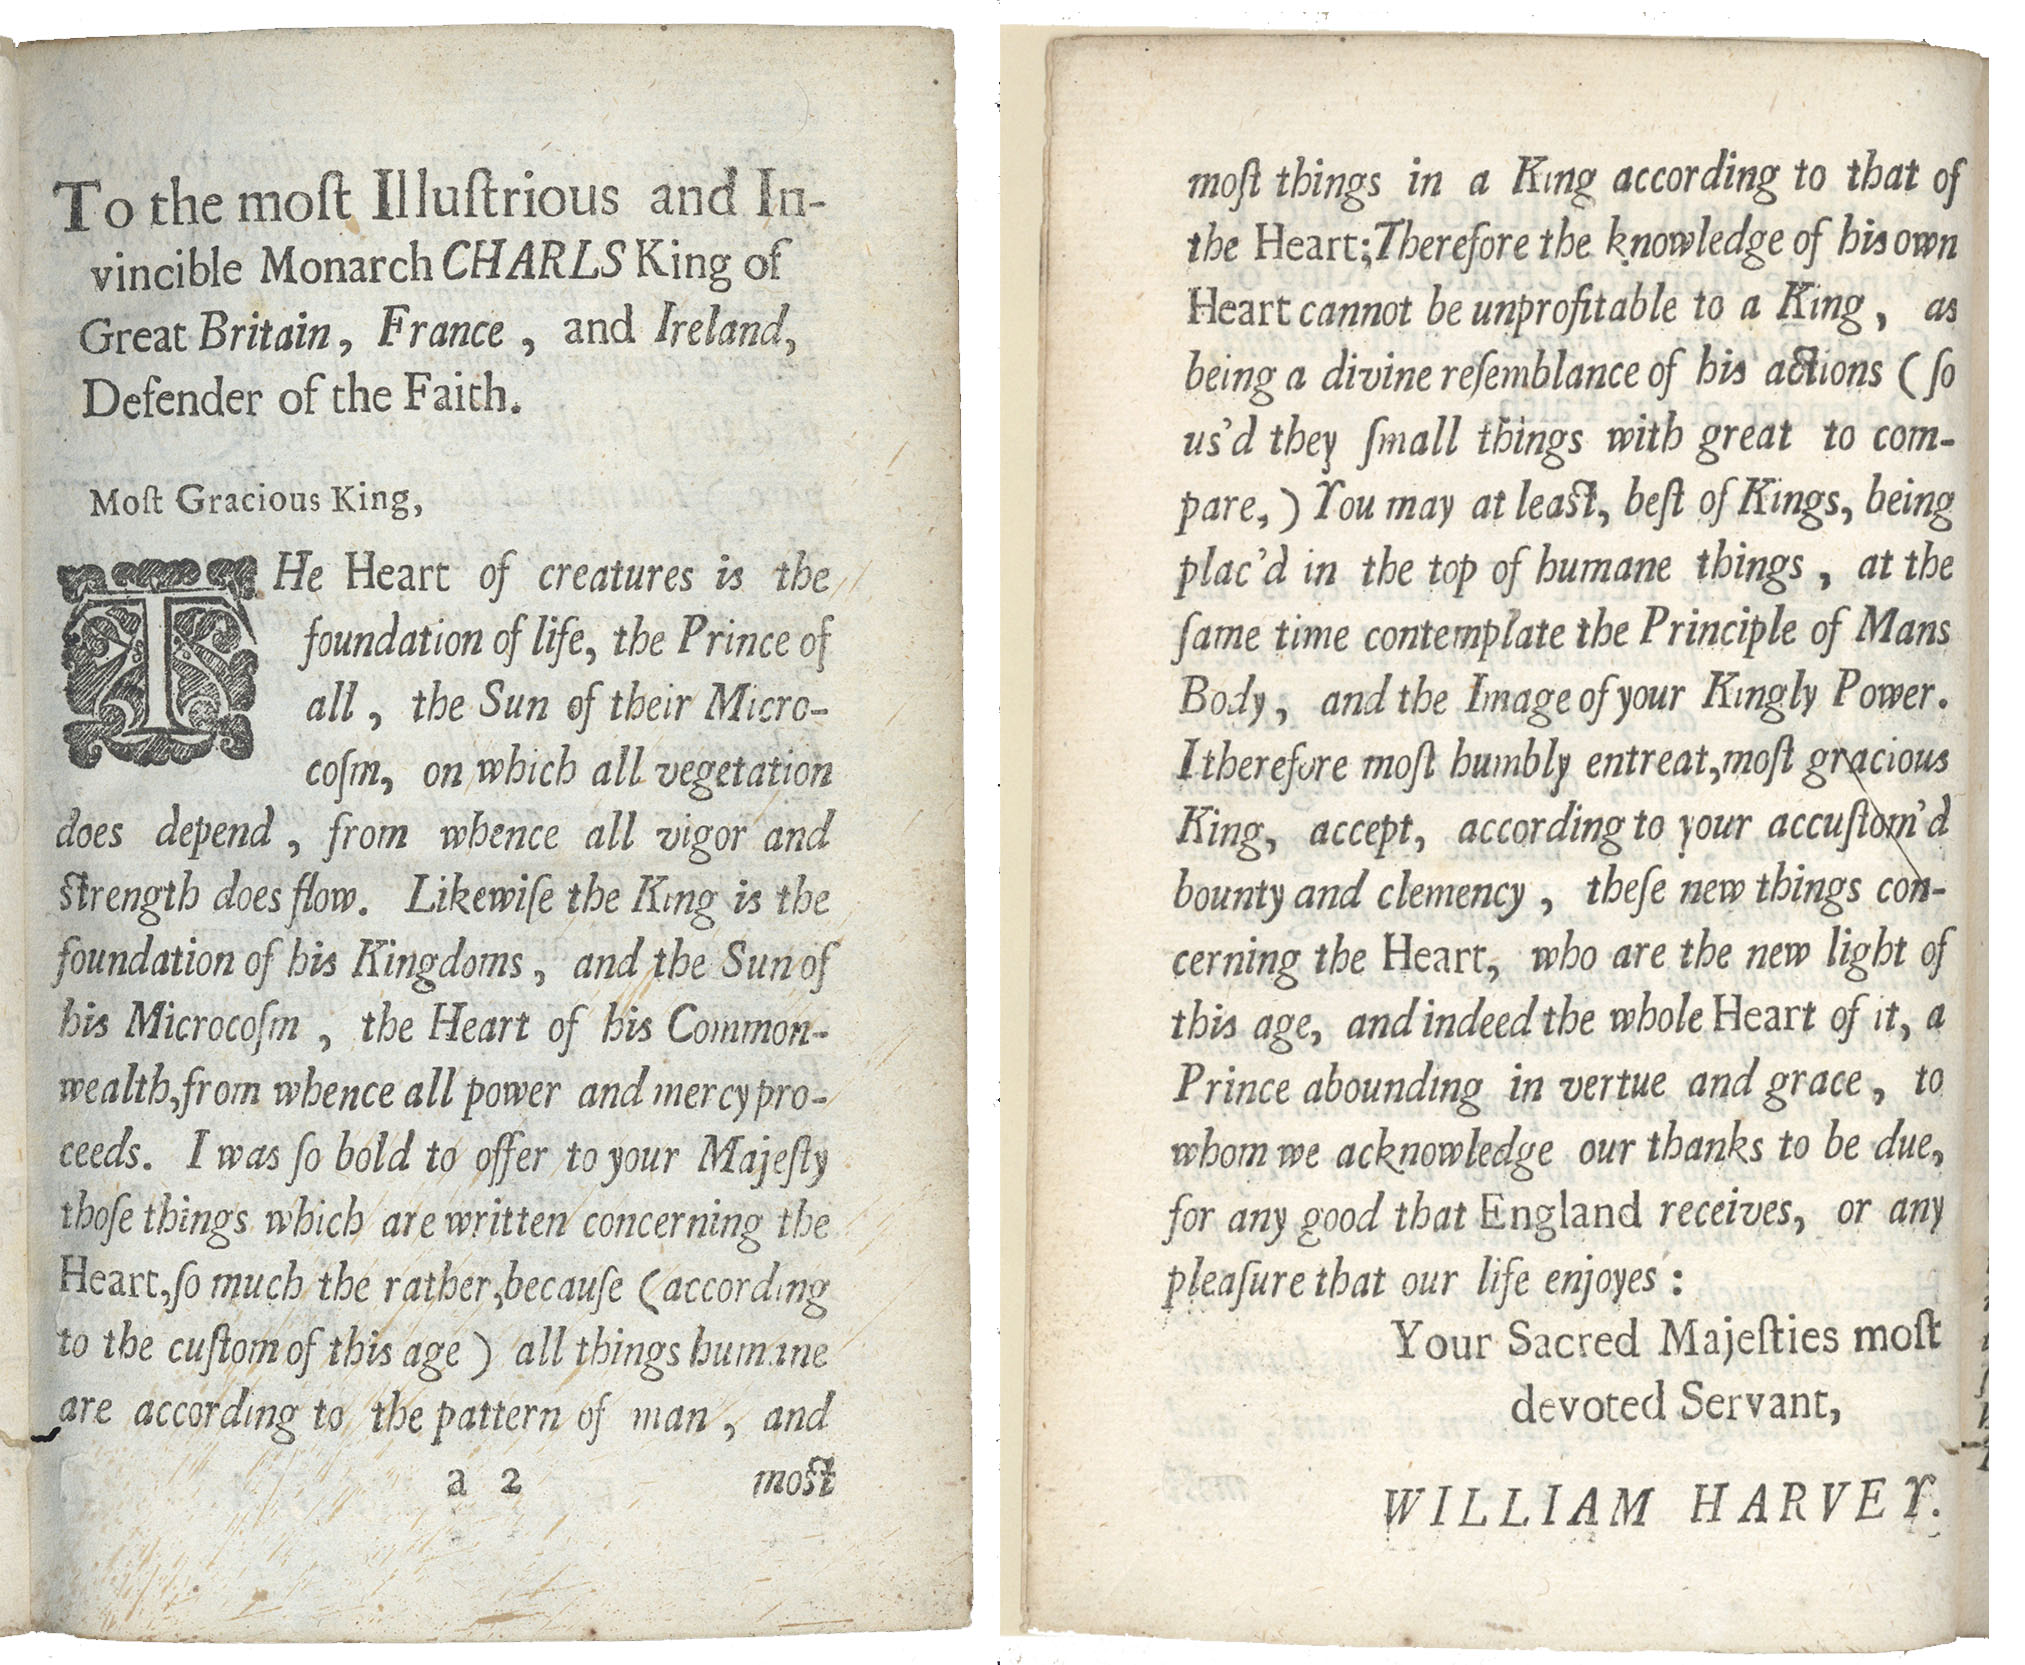 <p>Harvey included a letter of dedication to Charles I, King of England in his book The Anatomical Exercises of Willian Harvey concerning the motion of the Heart and Blood, showing the importance of royal patronage in developing new medical theories. Despite being physician to both James I and Charles I many doctors refused to believe Harvey’s work and instead clung on to the belief that Galen was correct.</p>
